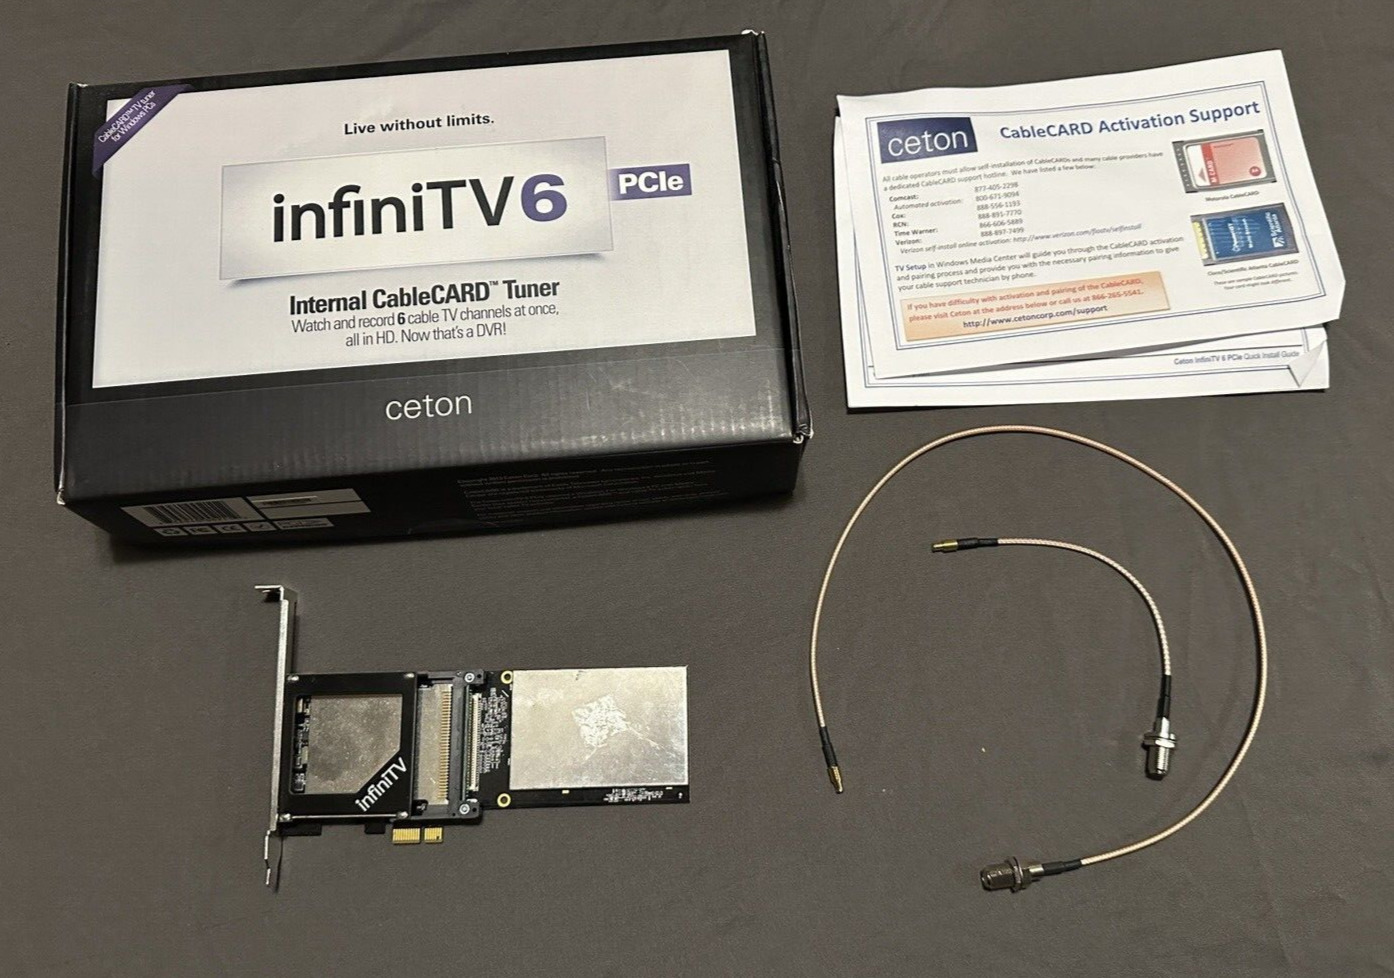 Ceton infiniTV 6 pcie 6-Tuner Network-Connected TV Cable Card Tuner